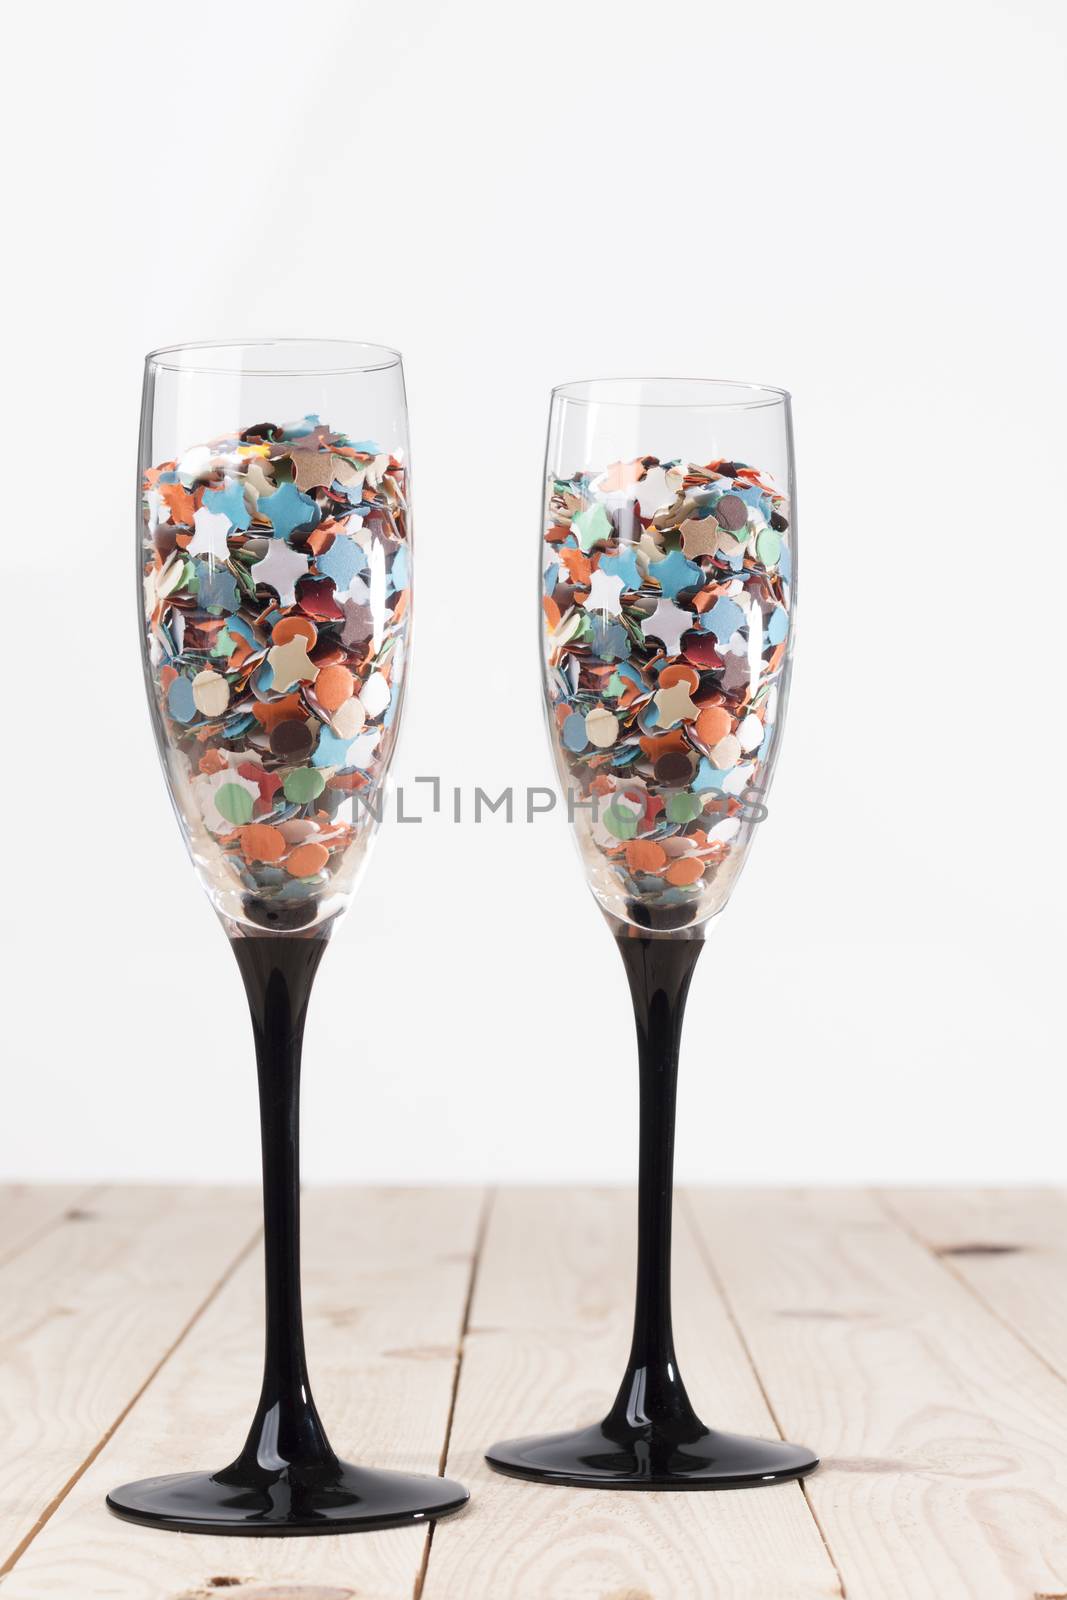 Champaign glasses with confetti, isolated by avanheertum